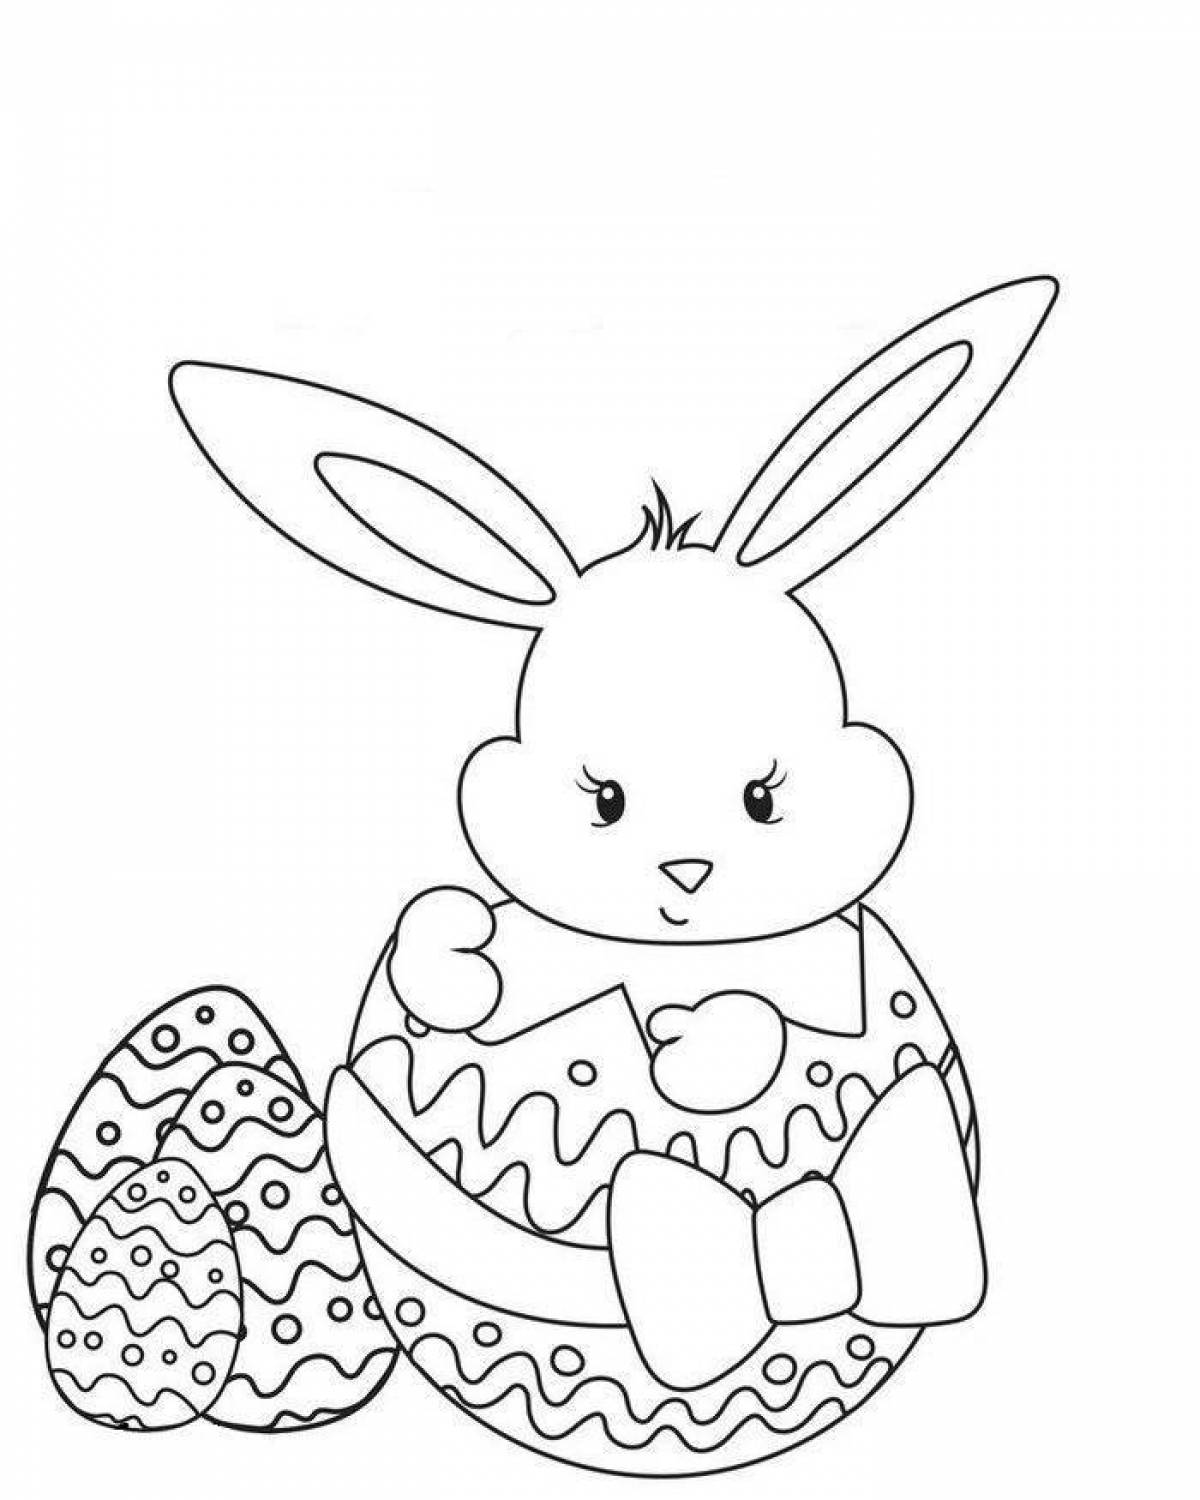 Fairy easter coloring book